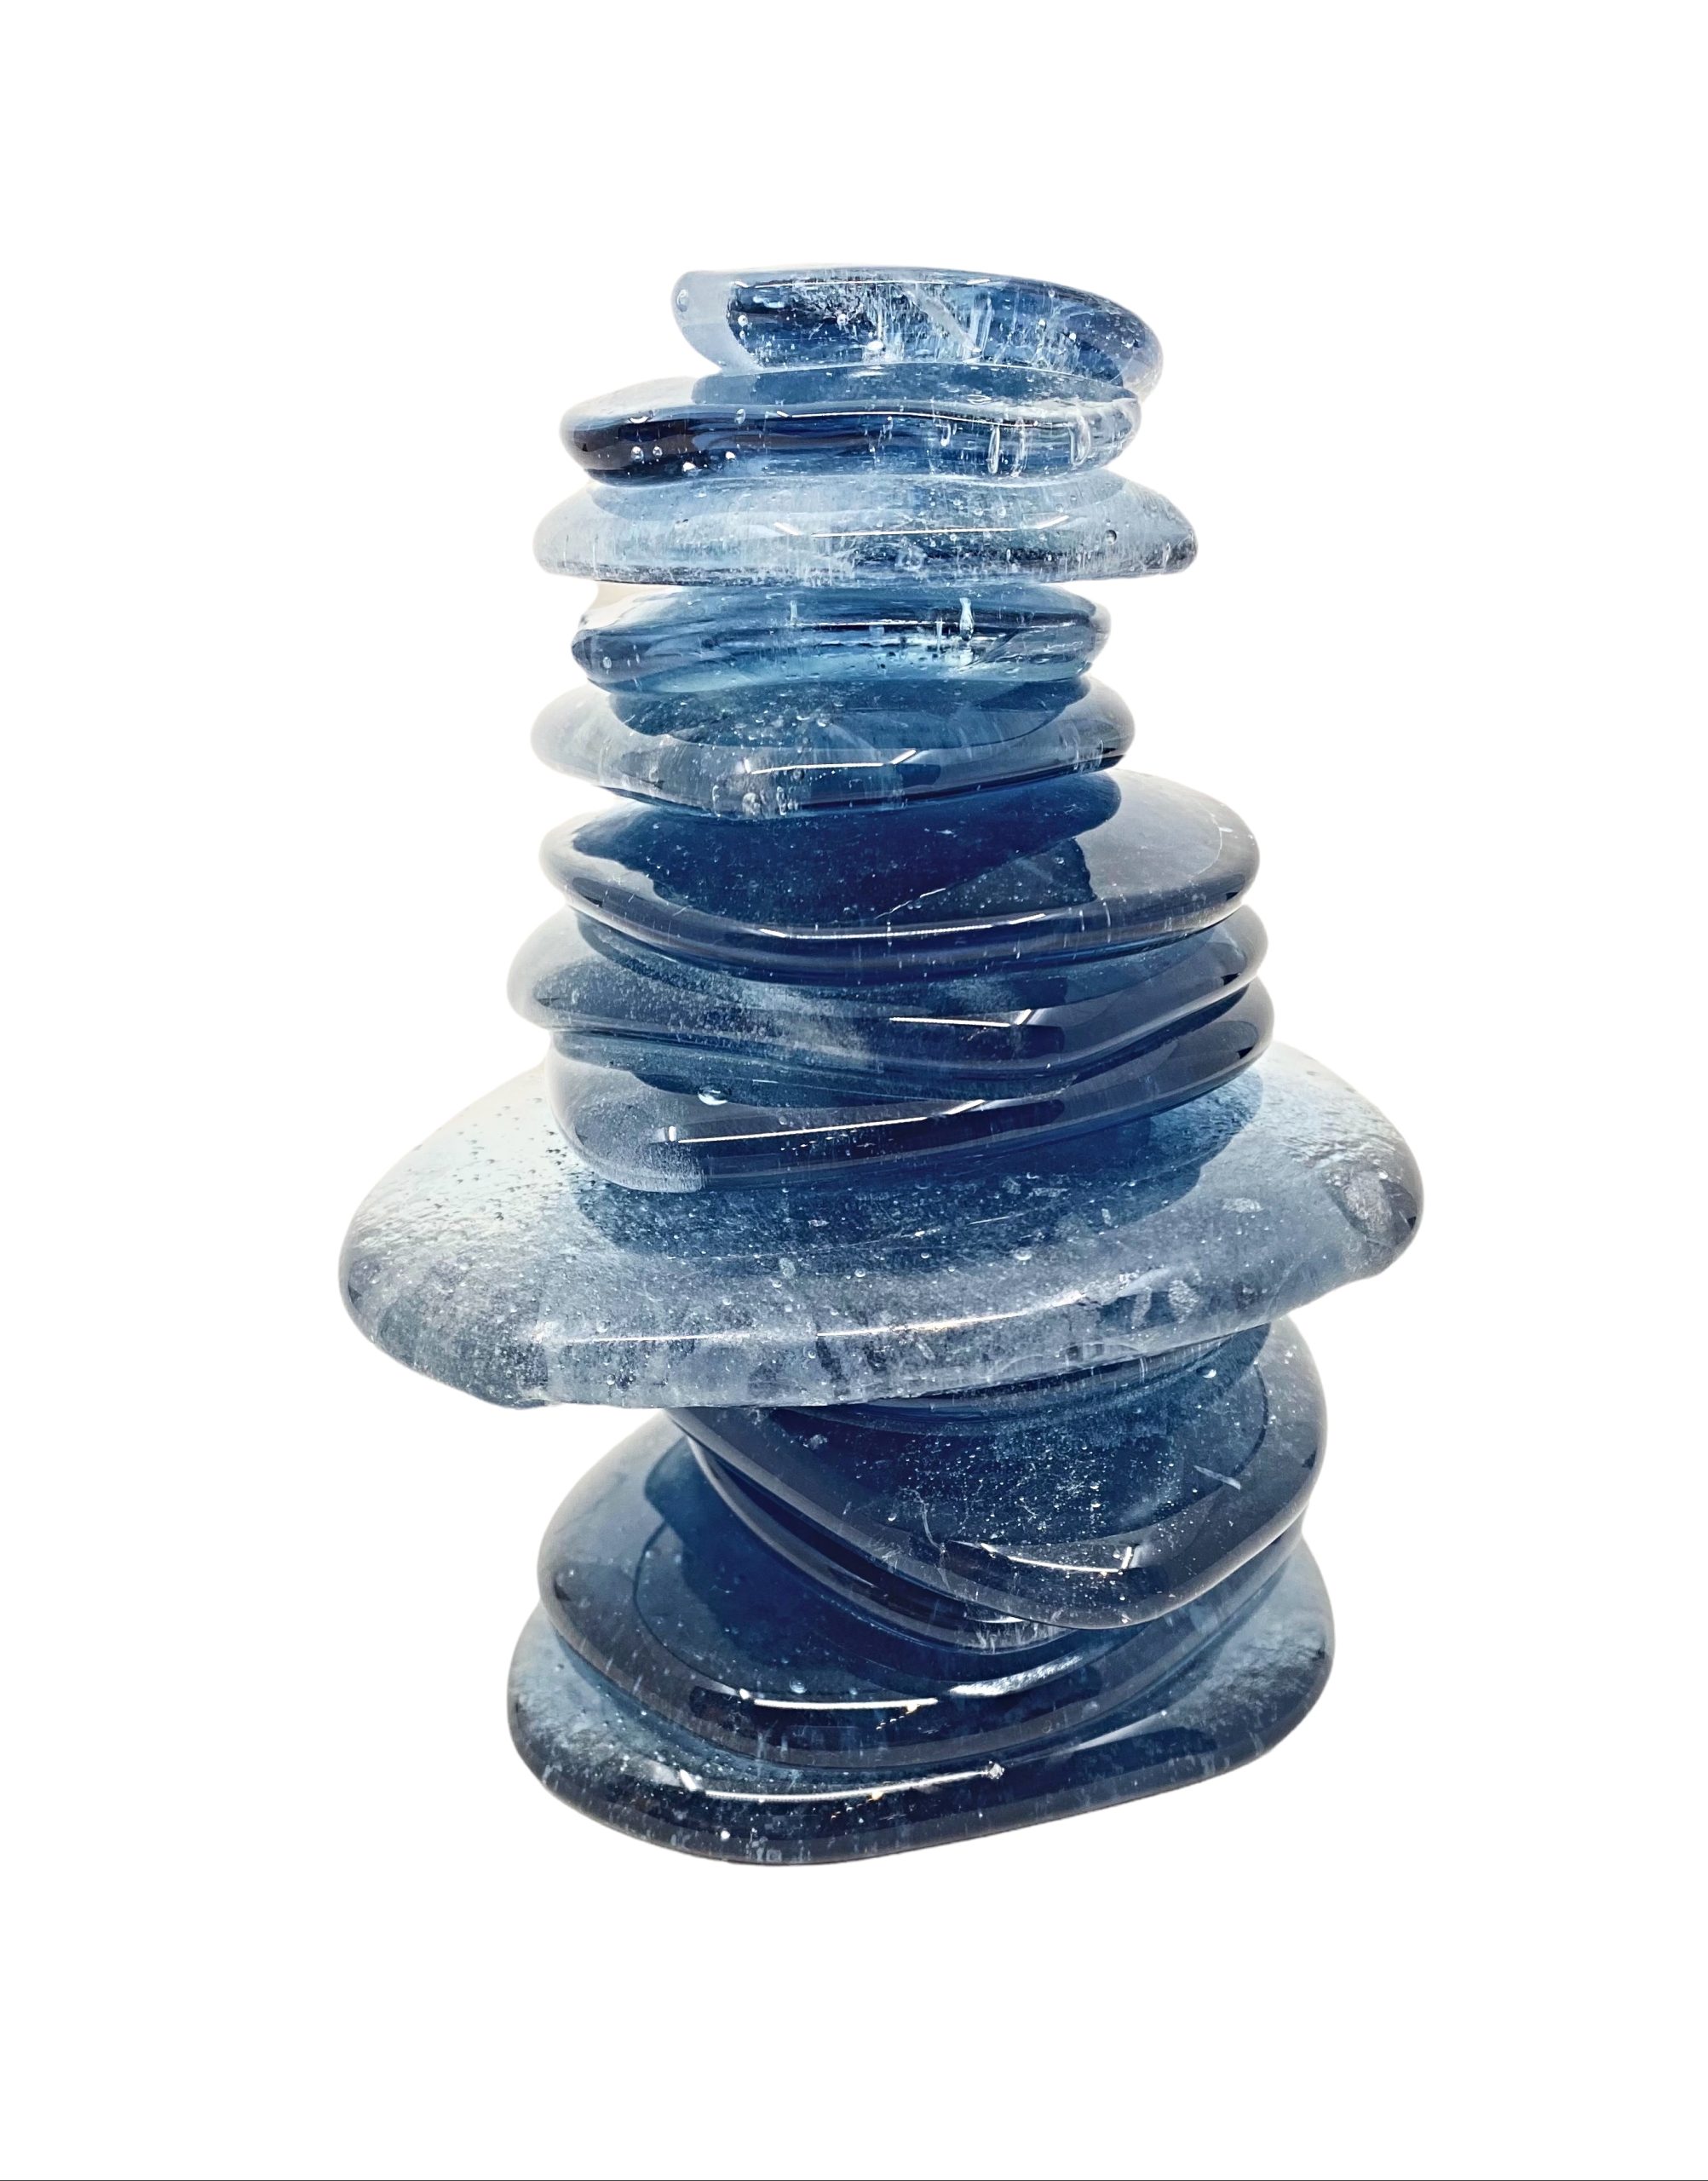 One-of-a-kind cast glass cairn sculpture by Heather Cuell | Effusion Art Gallery +  Cast Glass Studio, Invermere BC